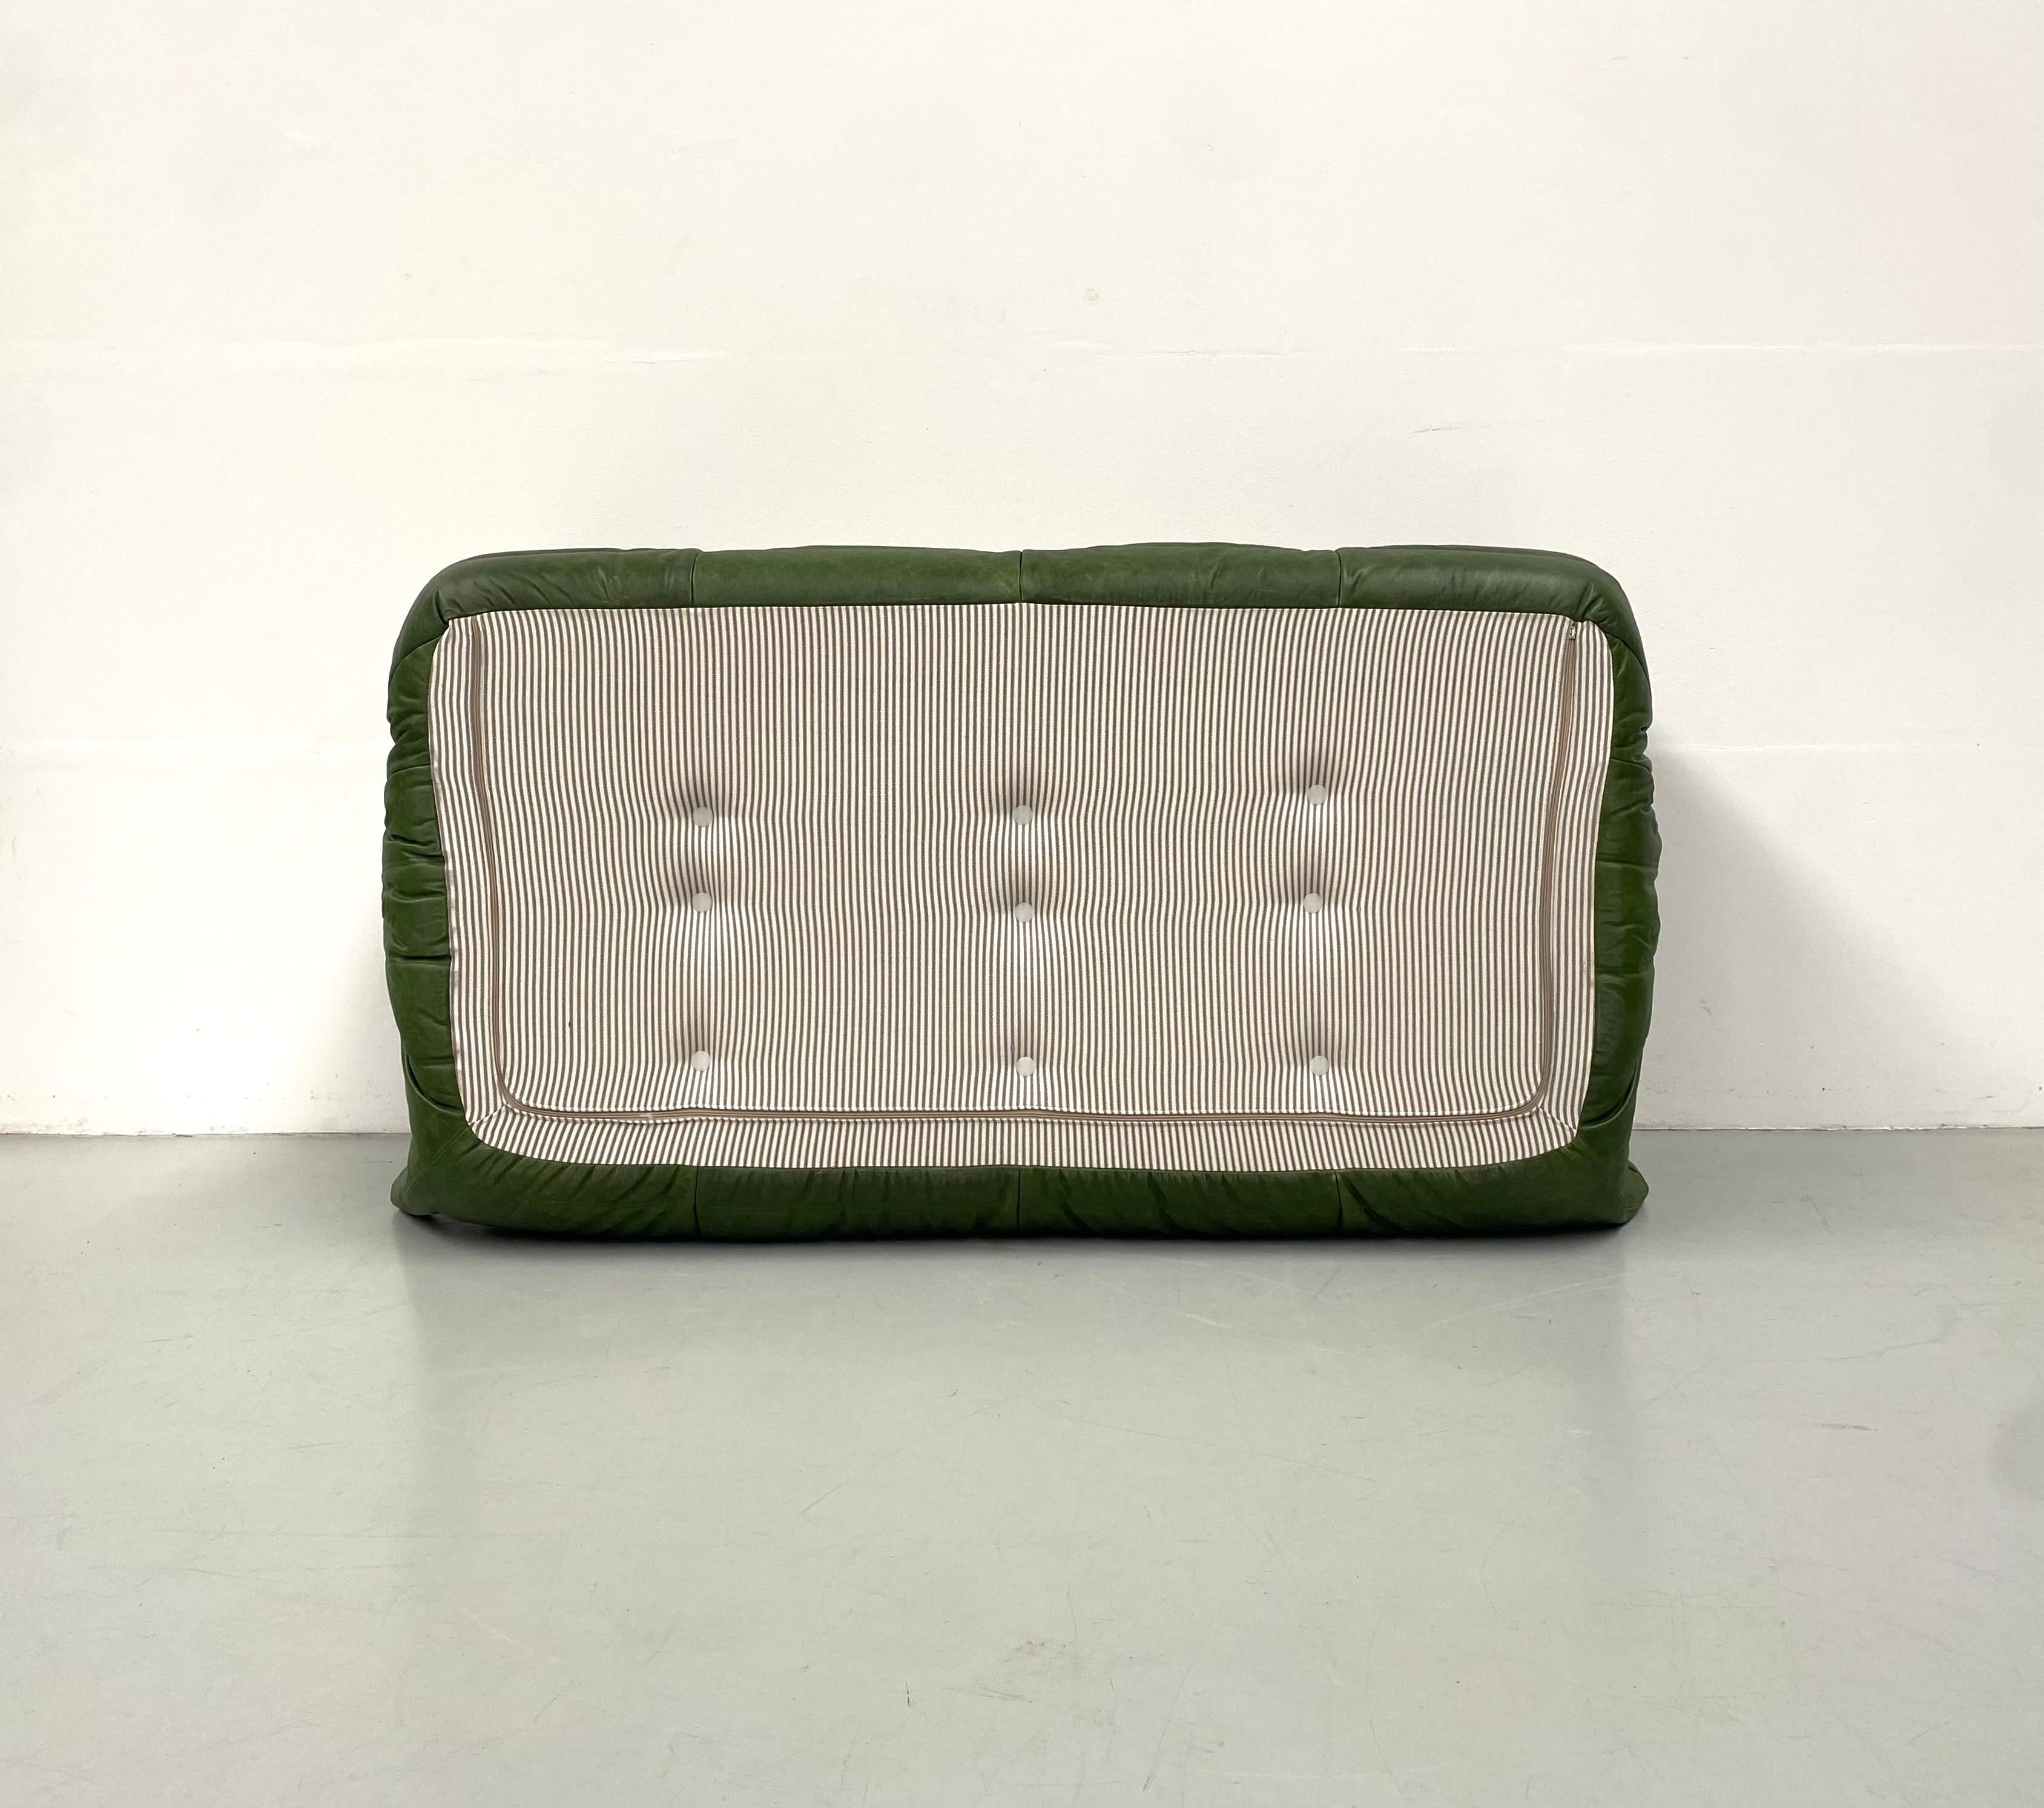 Danish Vintage French Togo Sofa in Green Leather by Michel Ducaroy for Ligne Roset